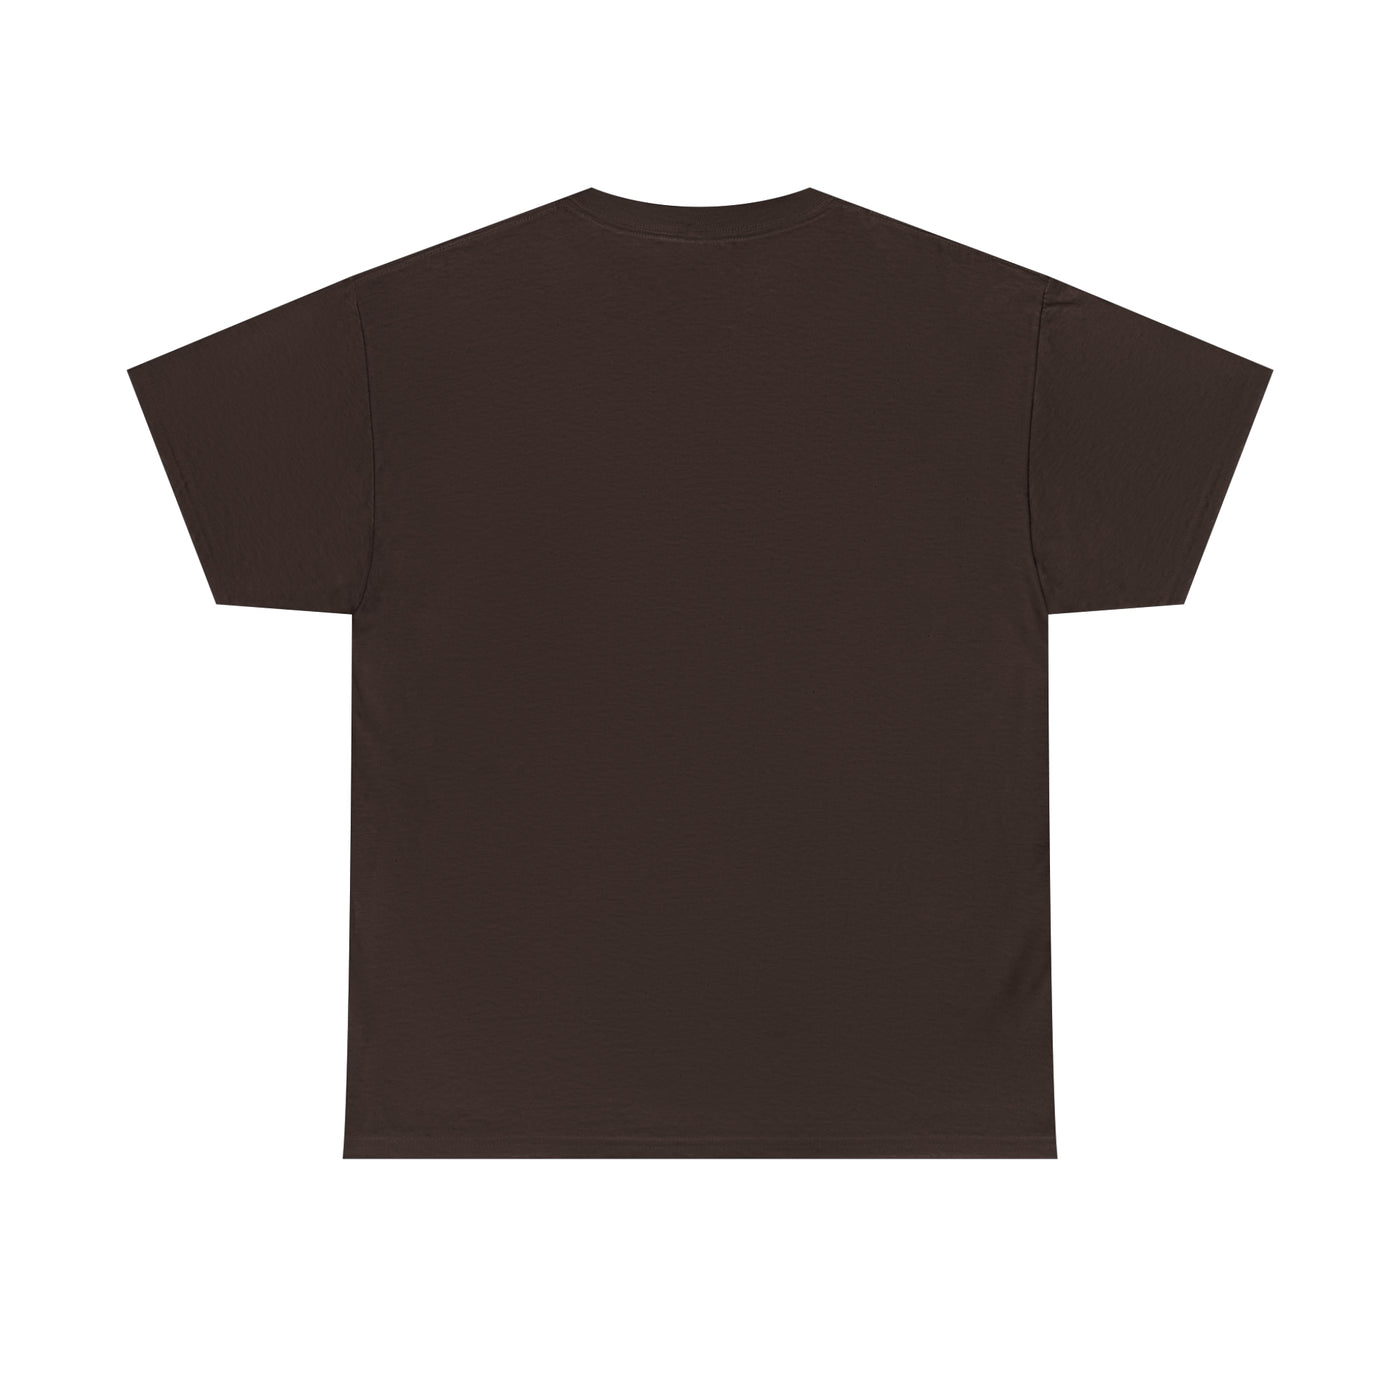 Heavyweight Cotton T Shirts | Let's Travel